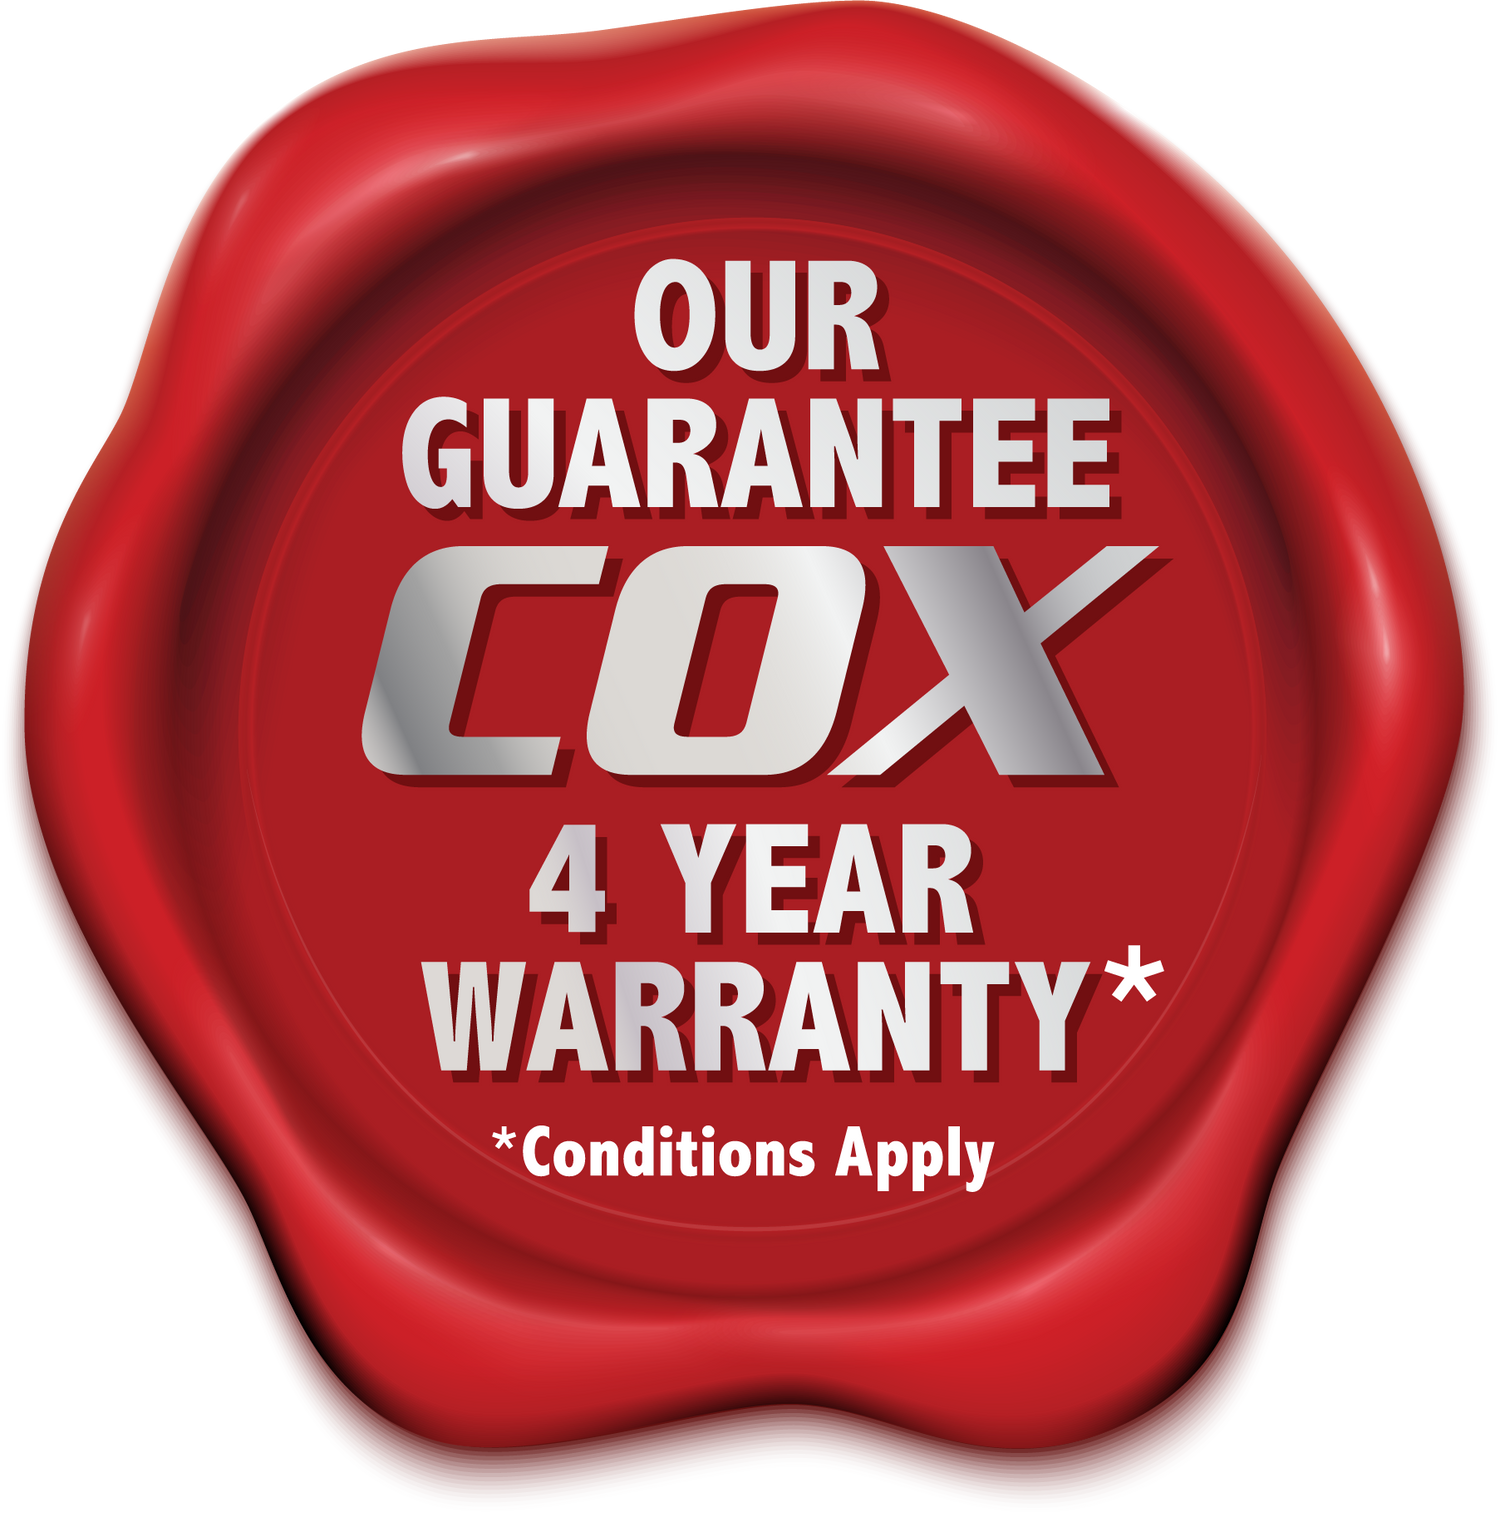 COX Power 4 year warranty seal icon. COX guarantees its commitment to providing warranty across all of its power products